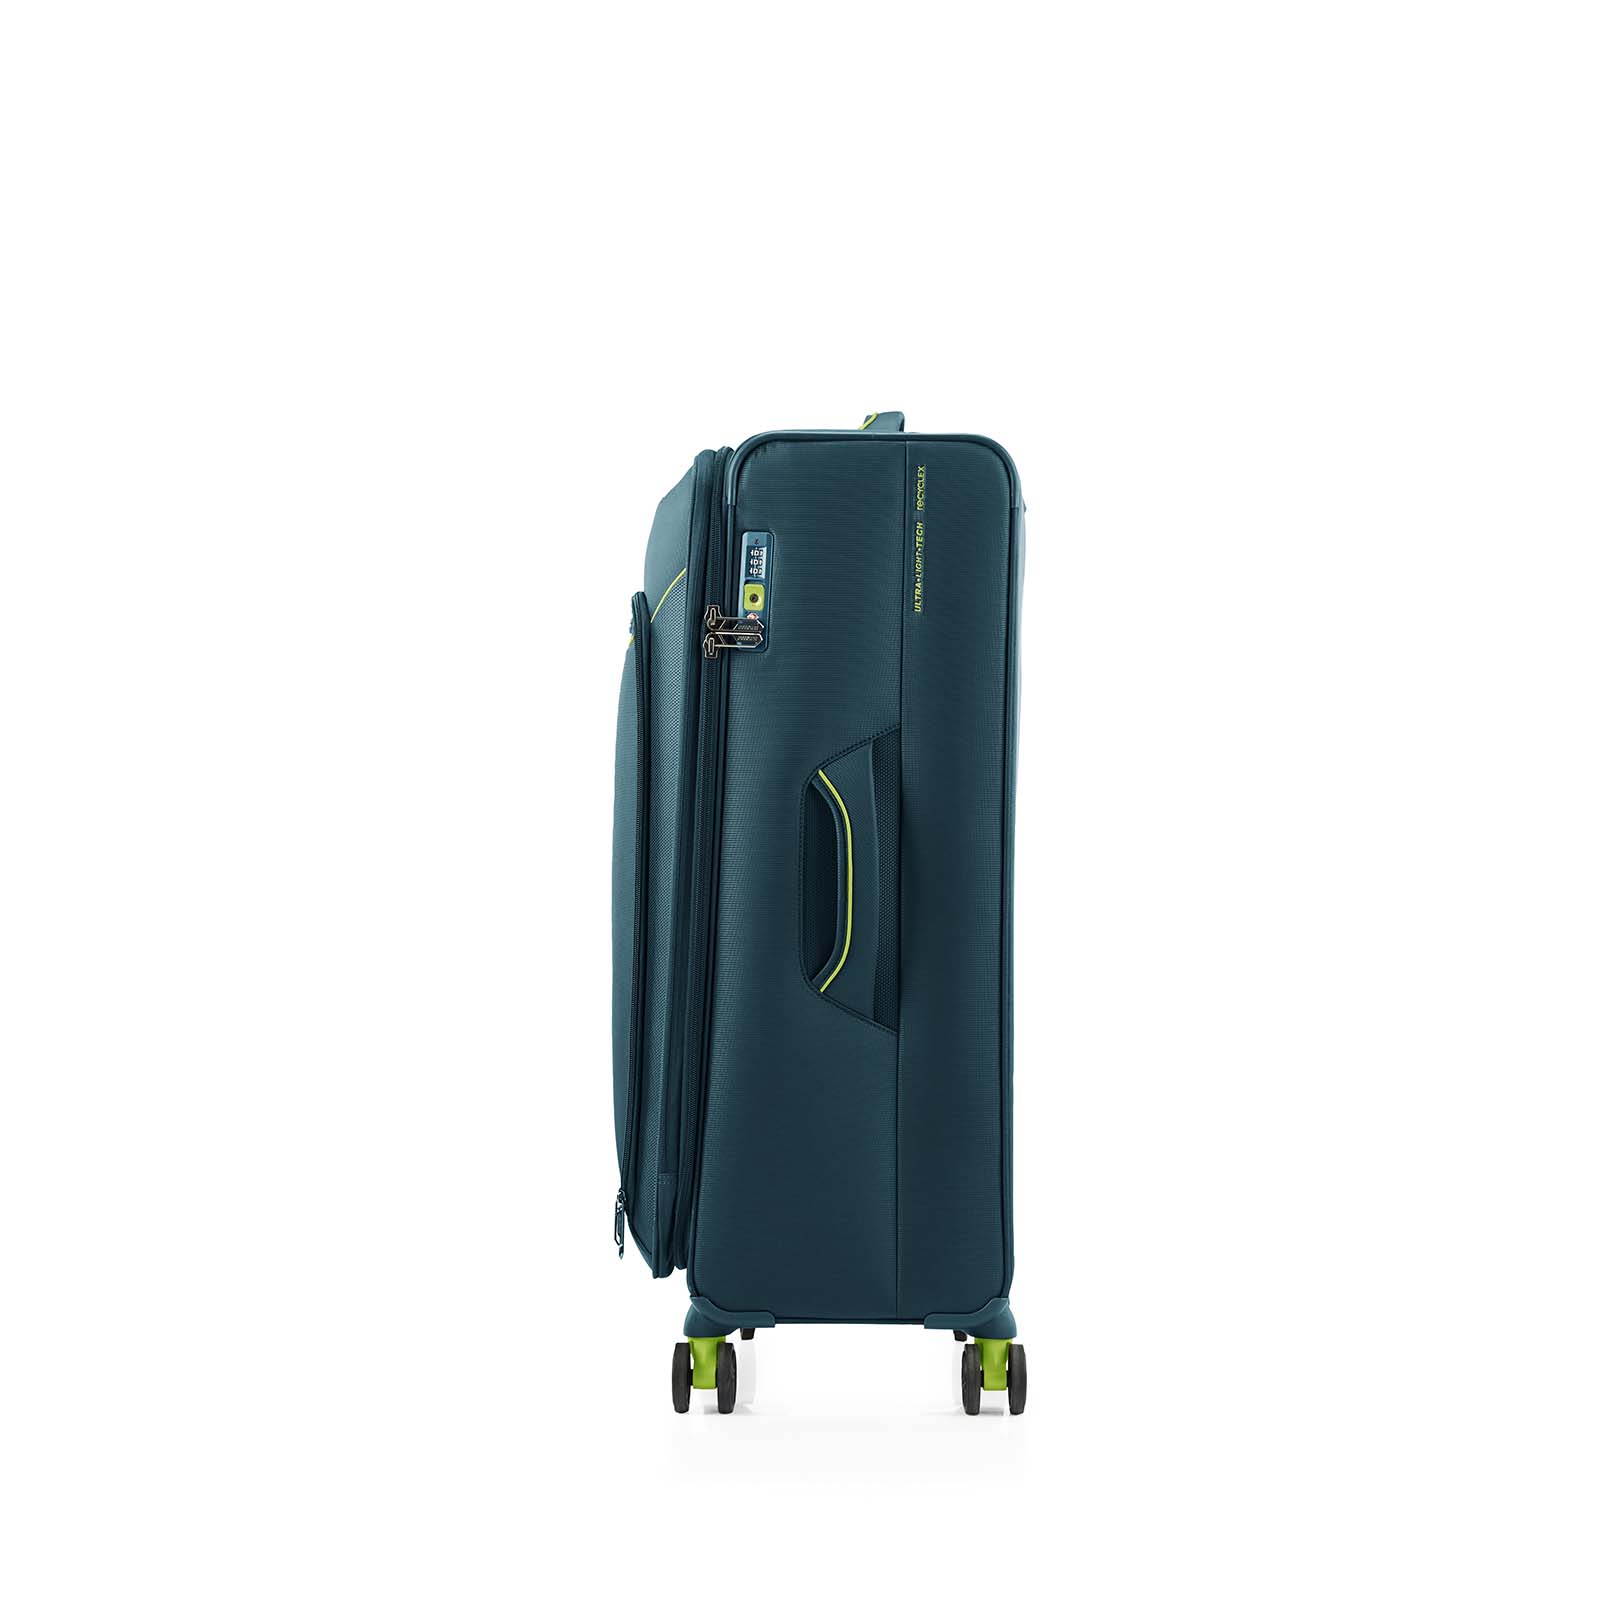 American-Tourister-Applite-4-Eco-82cm-Suitcase-Varsity-Green-Side